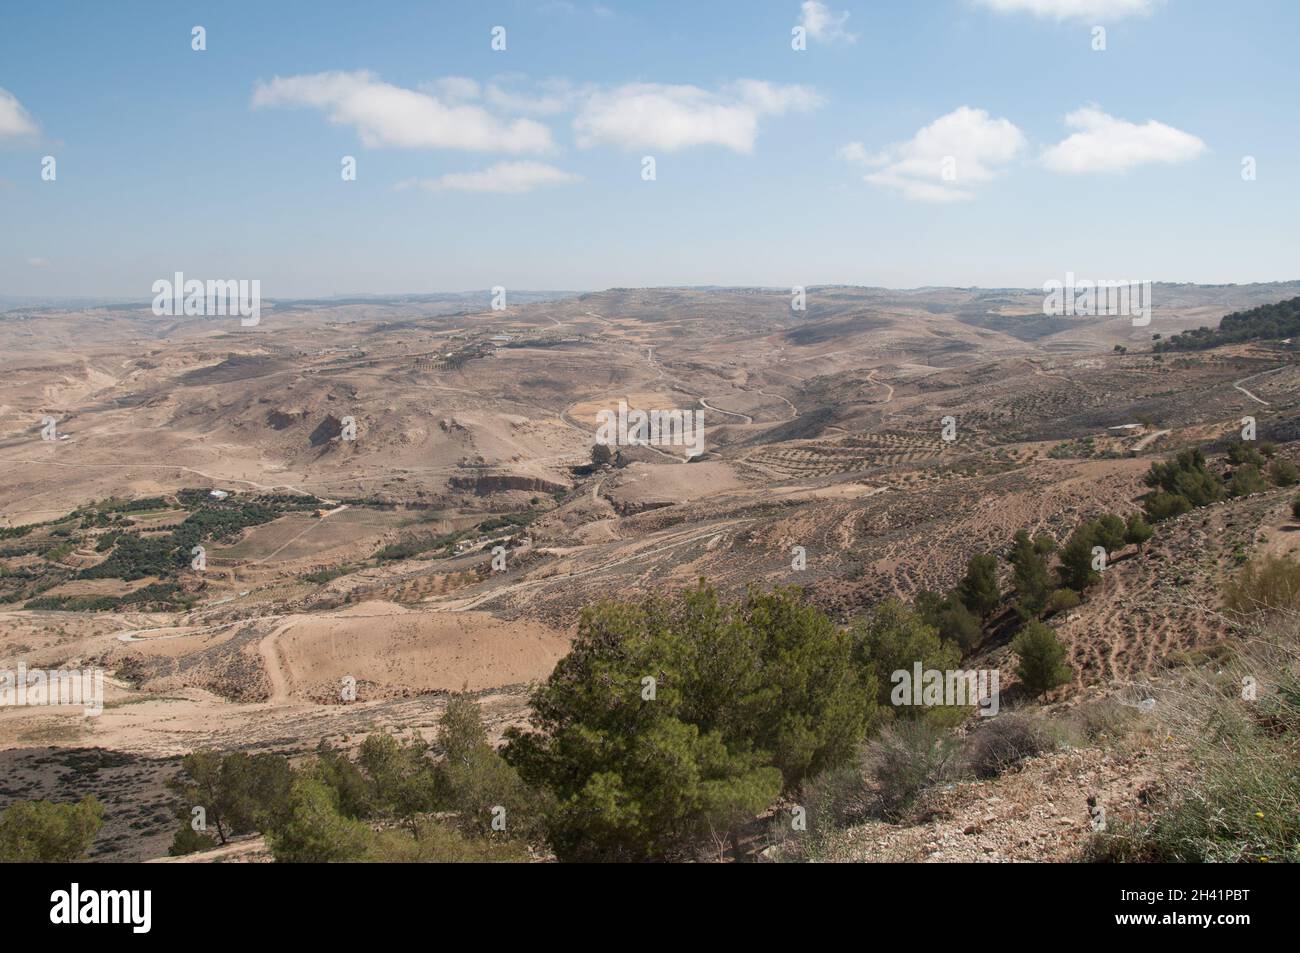 View from Mount Nebo, Jordan, Middle East.  Little vegetation, dry land.  Moses is believed to have seen the promised land from here and died on the m Stock Photo